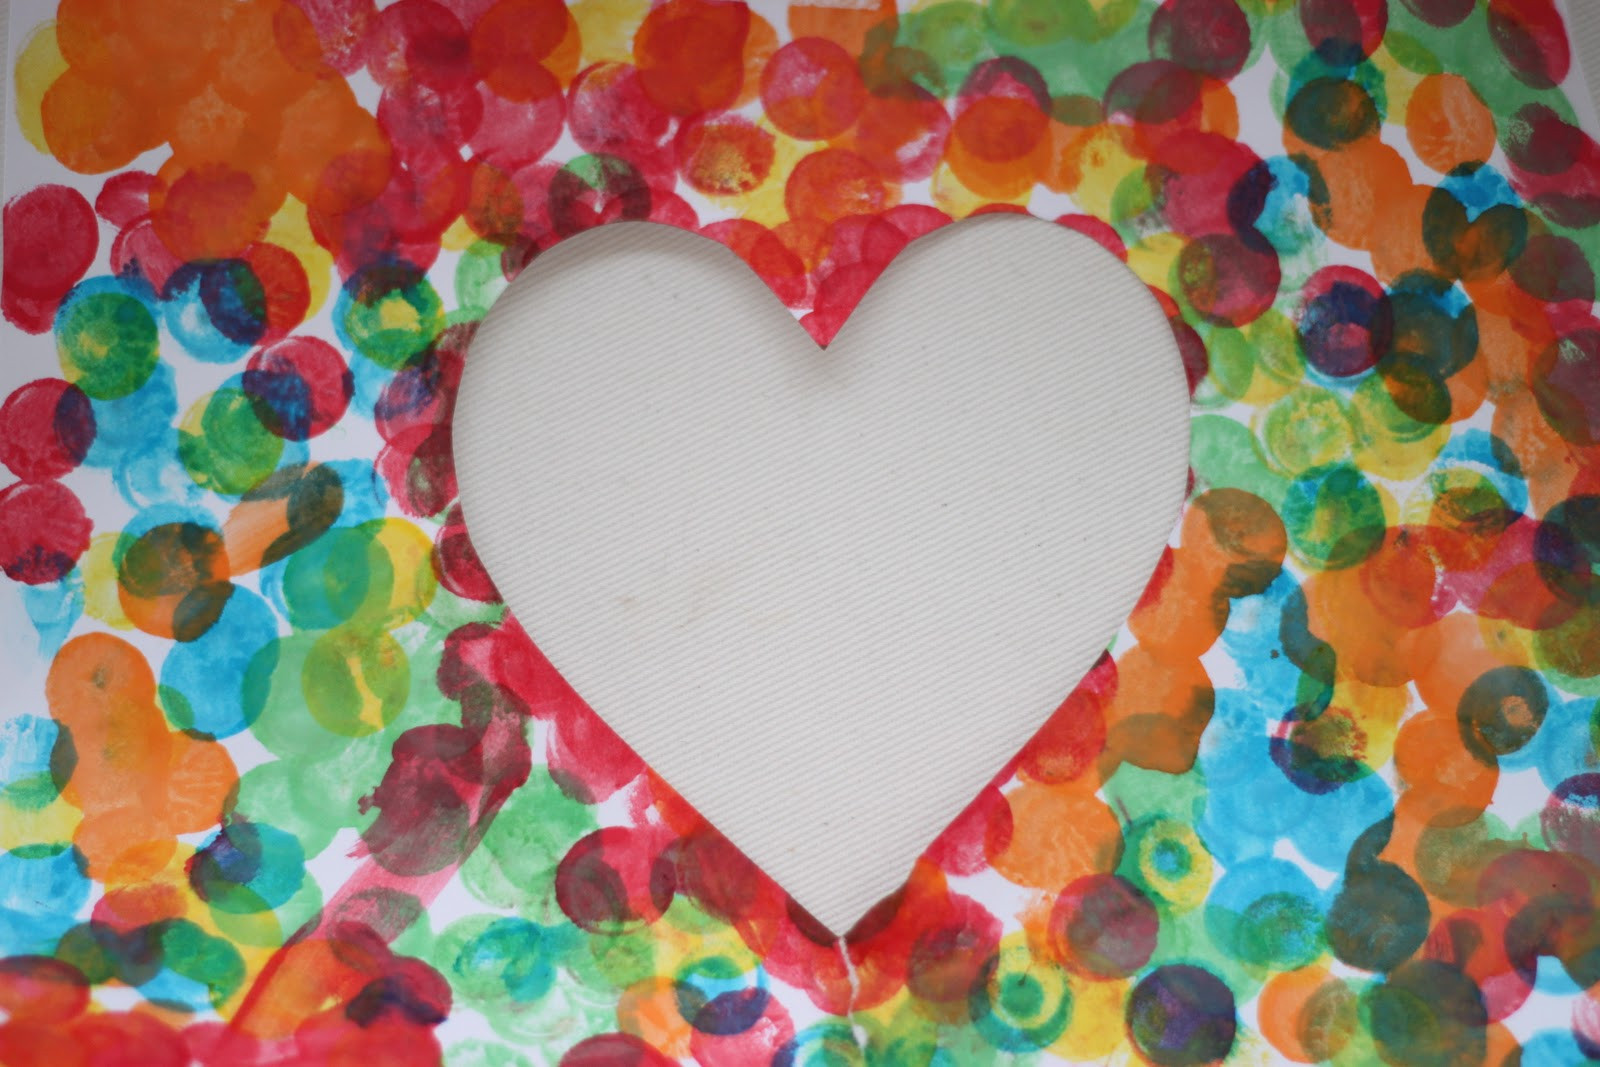 Heart Craft Ideas For Preschoolers
 Playing House Making Hearts Toddler Crafts